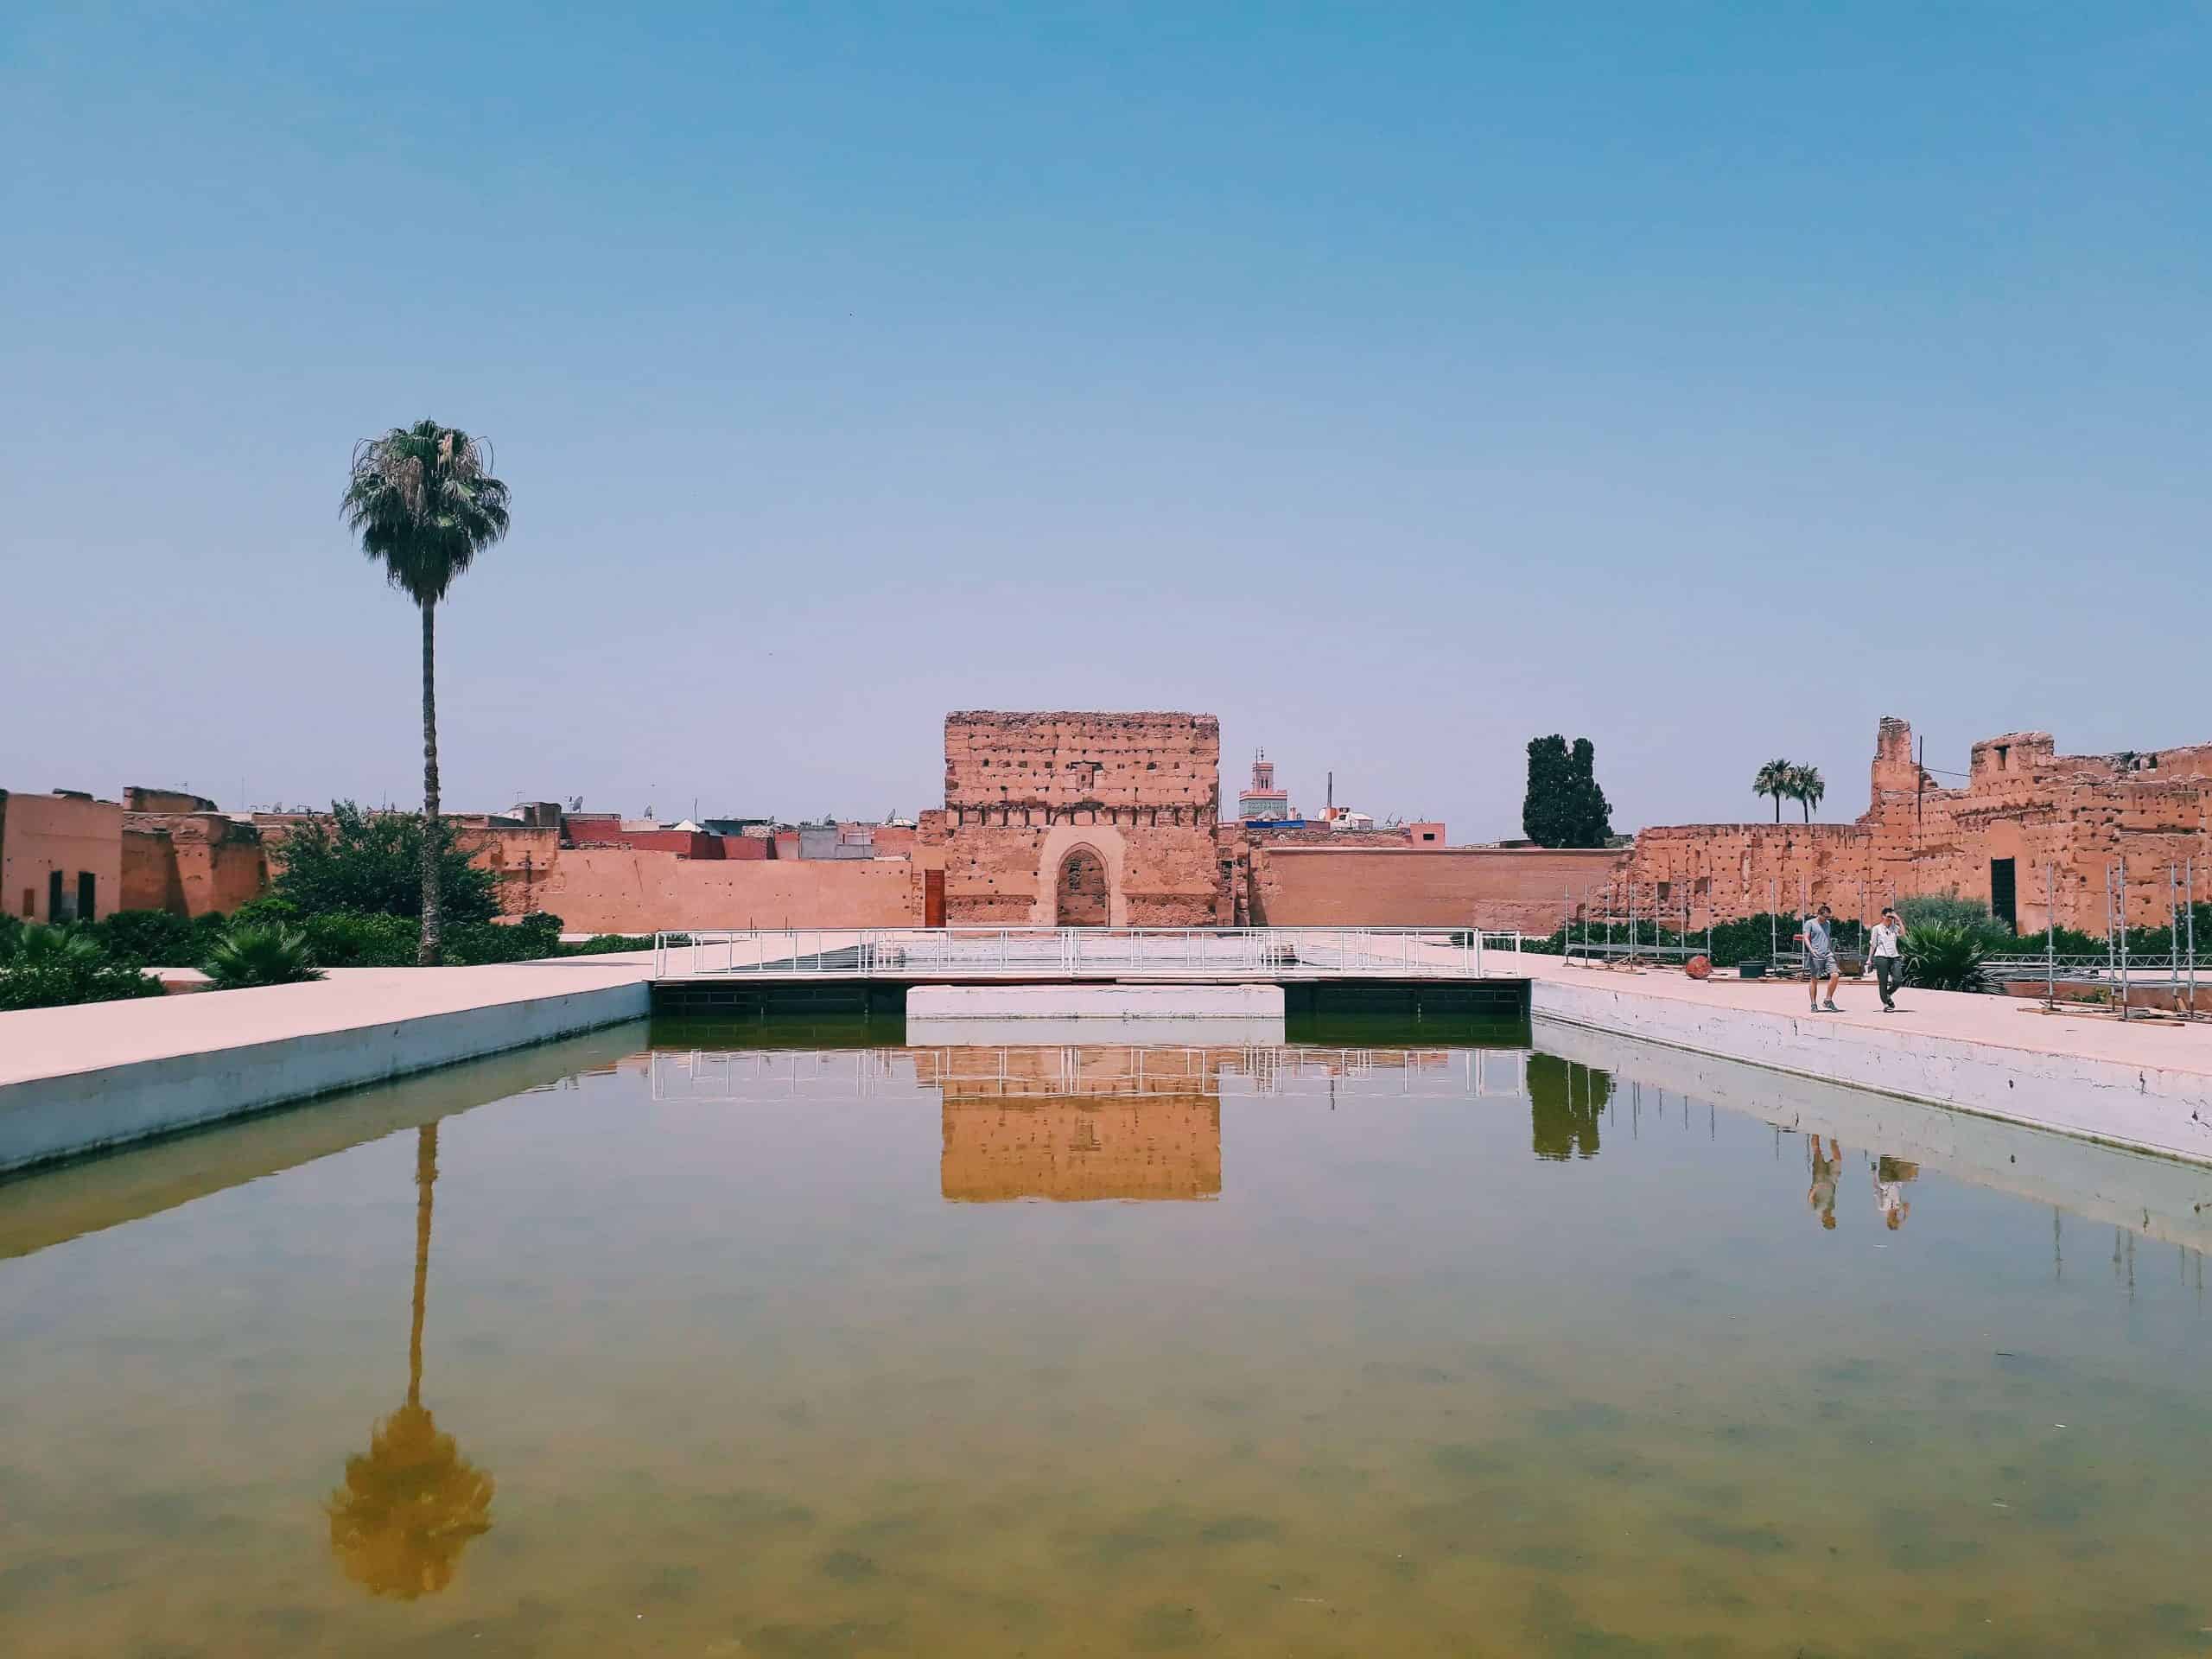 Things to do in Marrakech Morocco